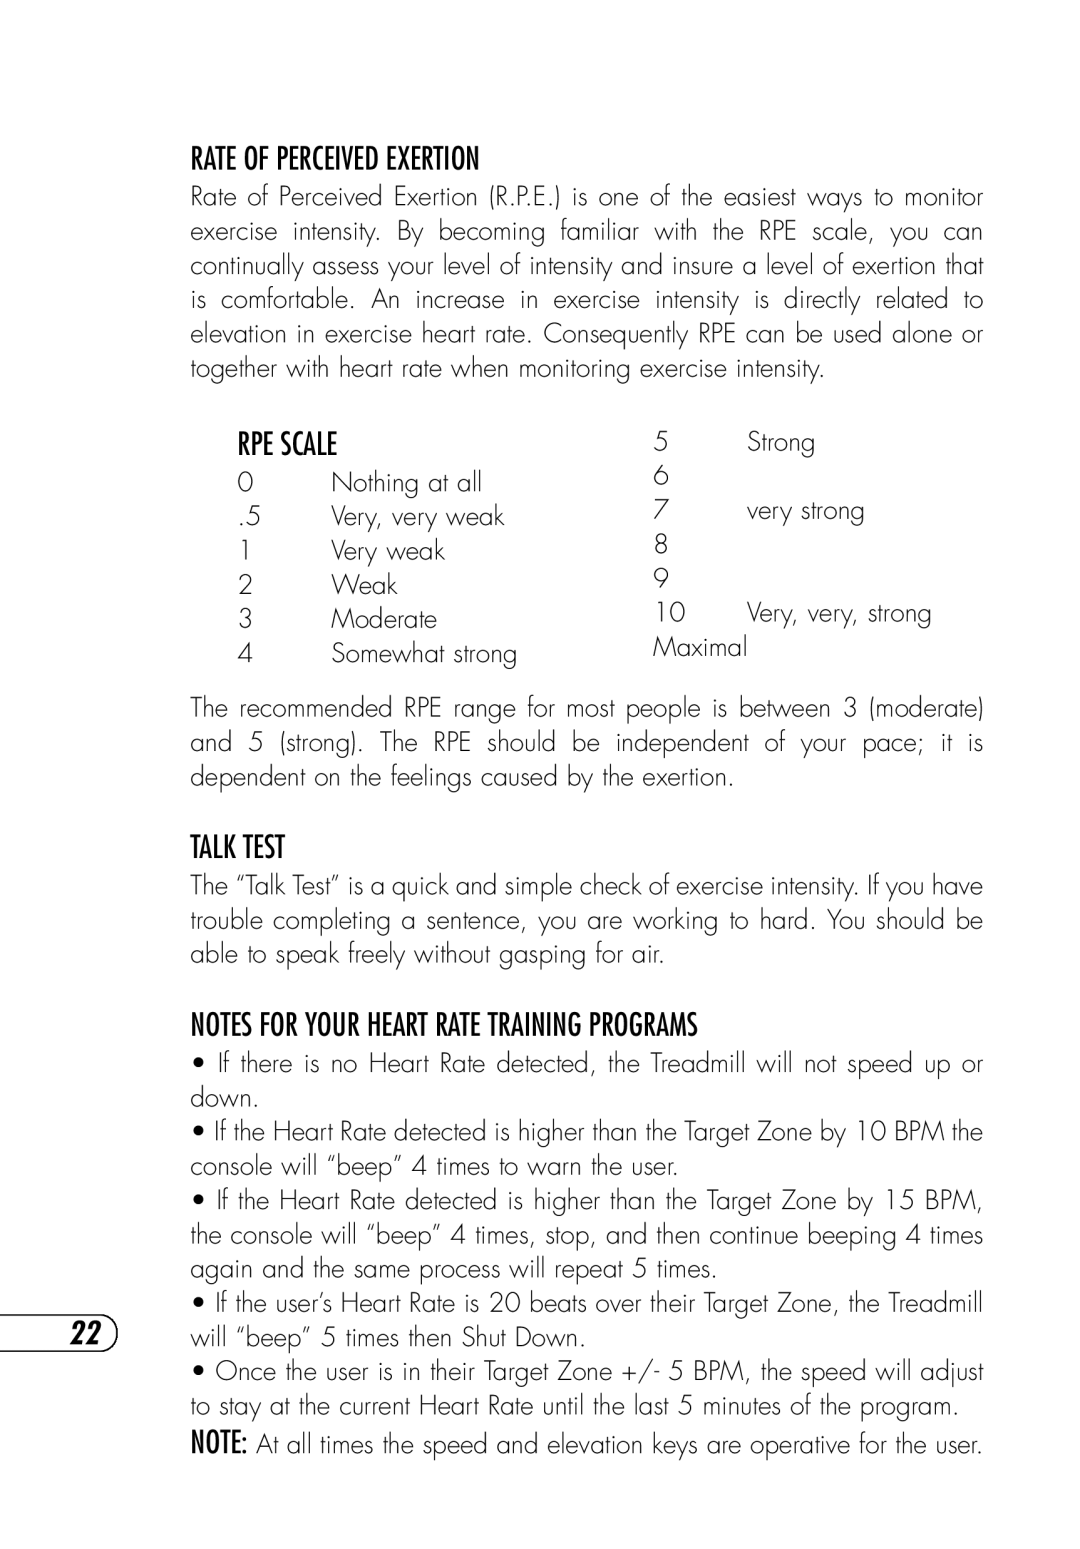 Vision Fitness T9700 Runner's manual Rate of Perceived Exertion, RPE Scale, Talk Test 